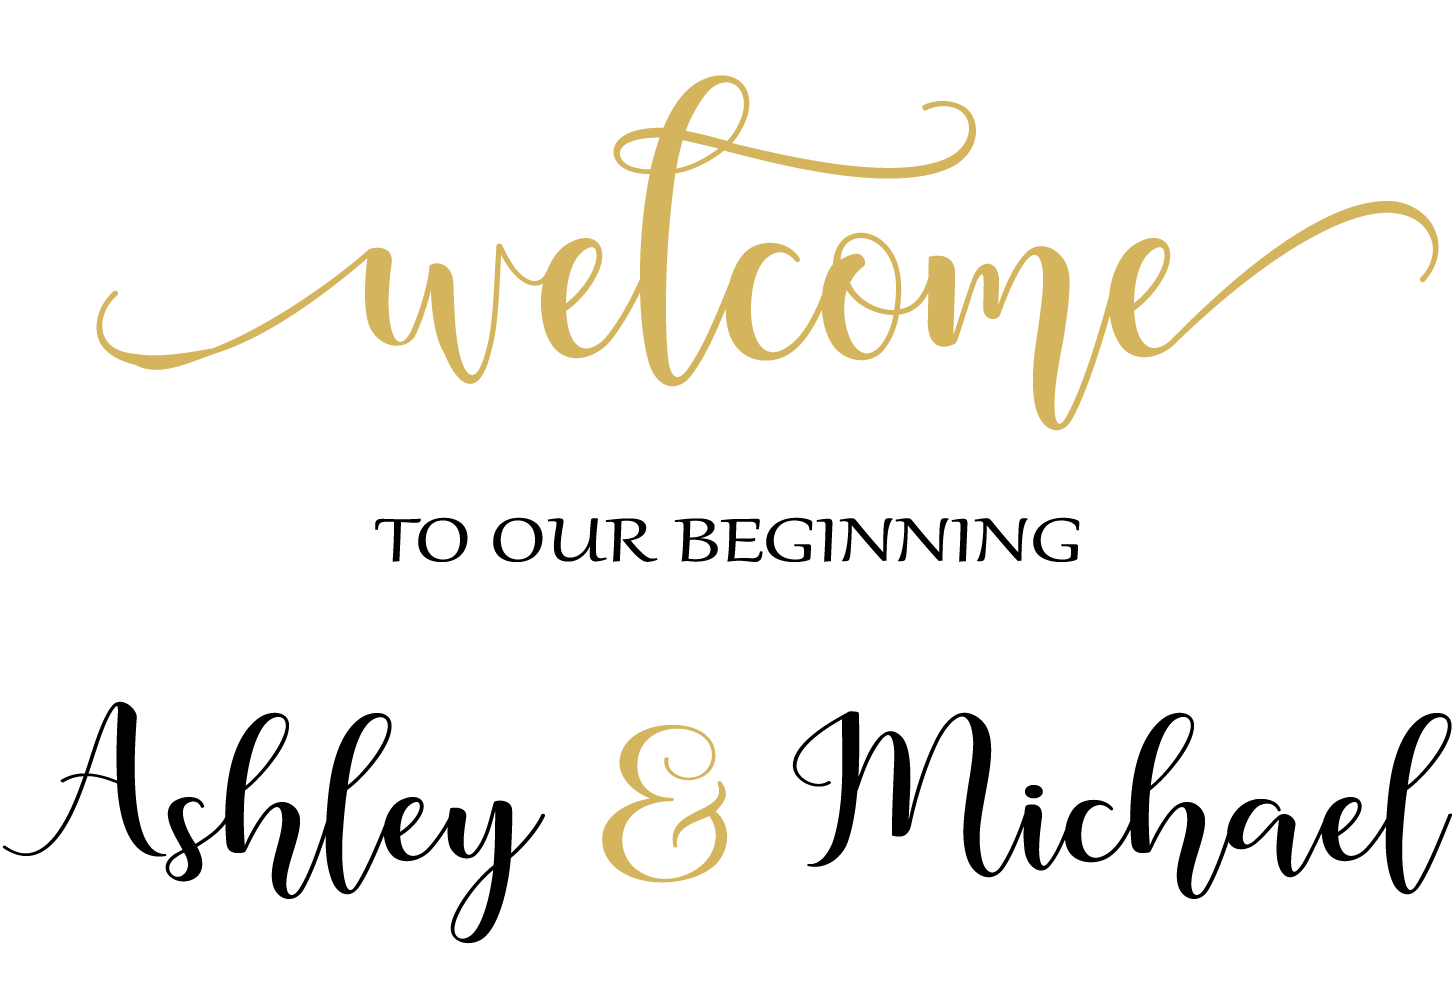 Elegant Welcome Wedding Sign - 18X24 Canvas - Bridesmaid Gifts Boutique